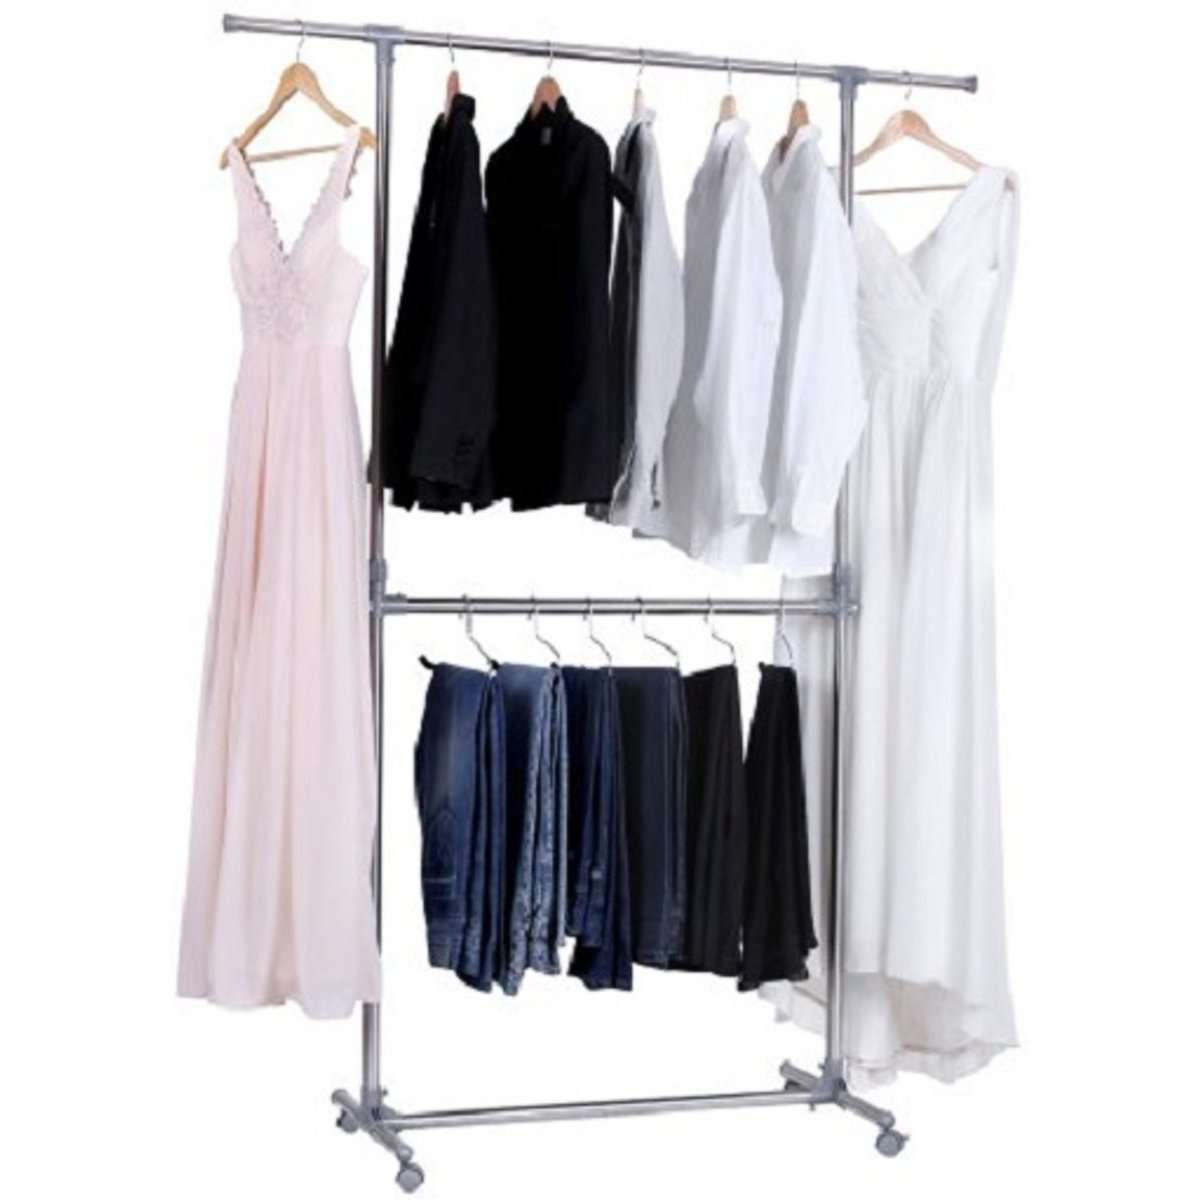 Nancy's Clothes Rack - Standing 2 Tier Clothes Rack, Adjustable in Height and Width - Clothing Storage Rack with Wheels - Mobile Clothing Rack with 2 Rods